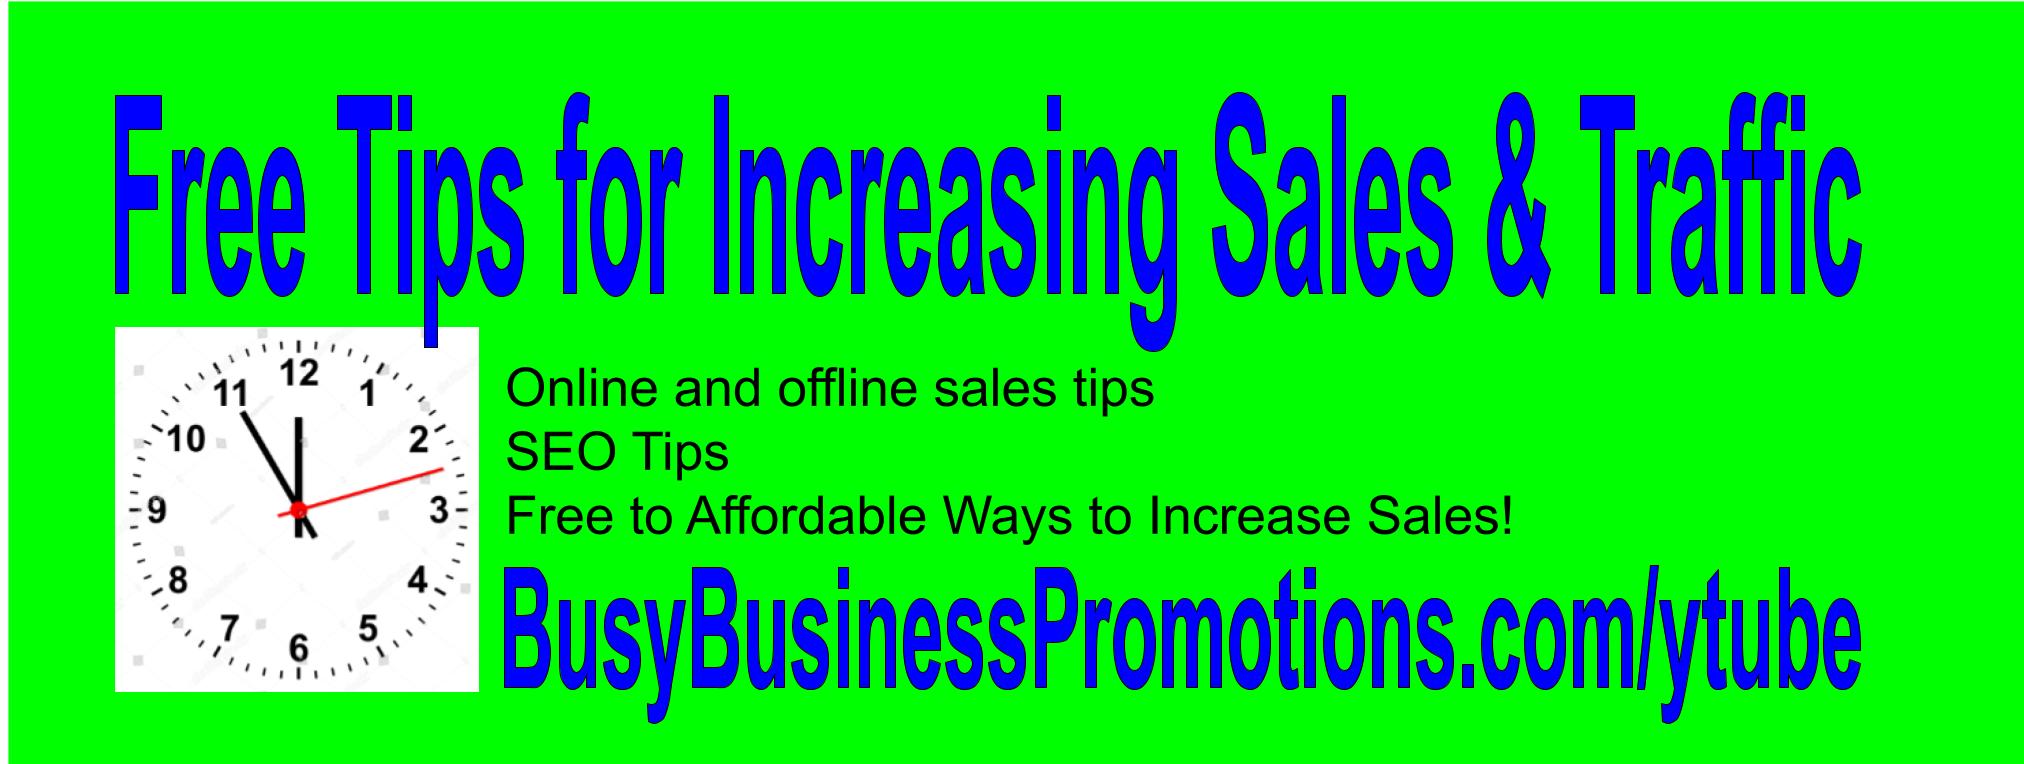 banner for Why You Should Subscribe To My Youtube Channel On Increasing Sales And Traffic To Your Website